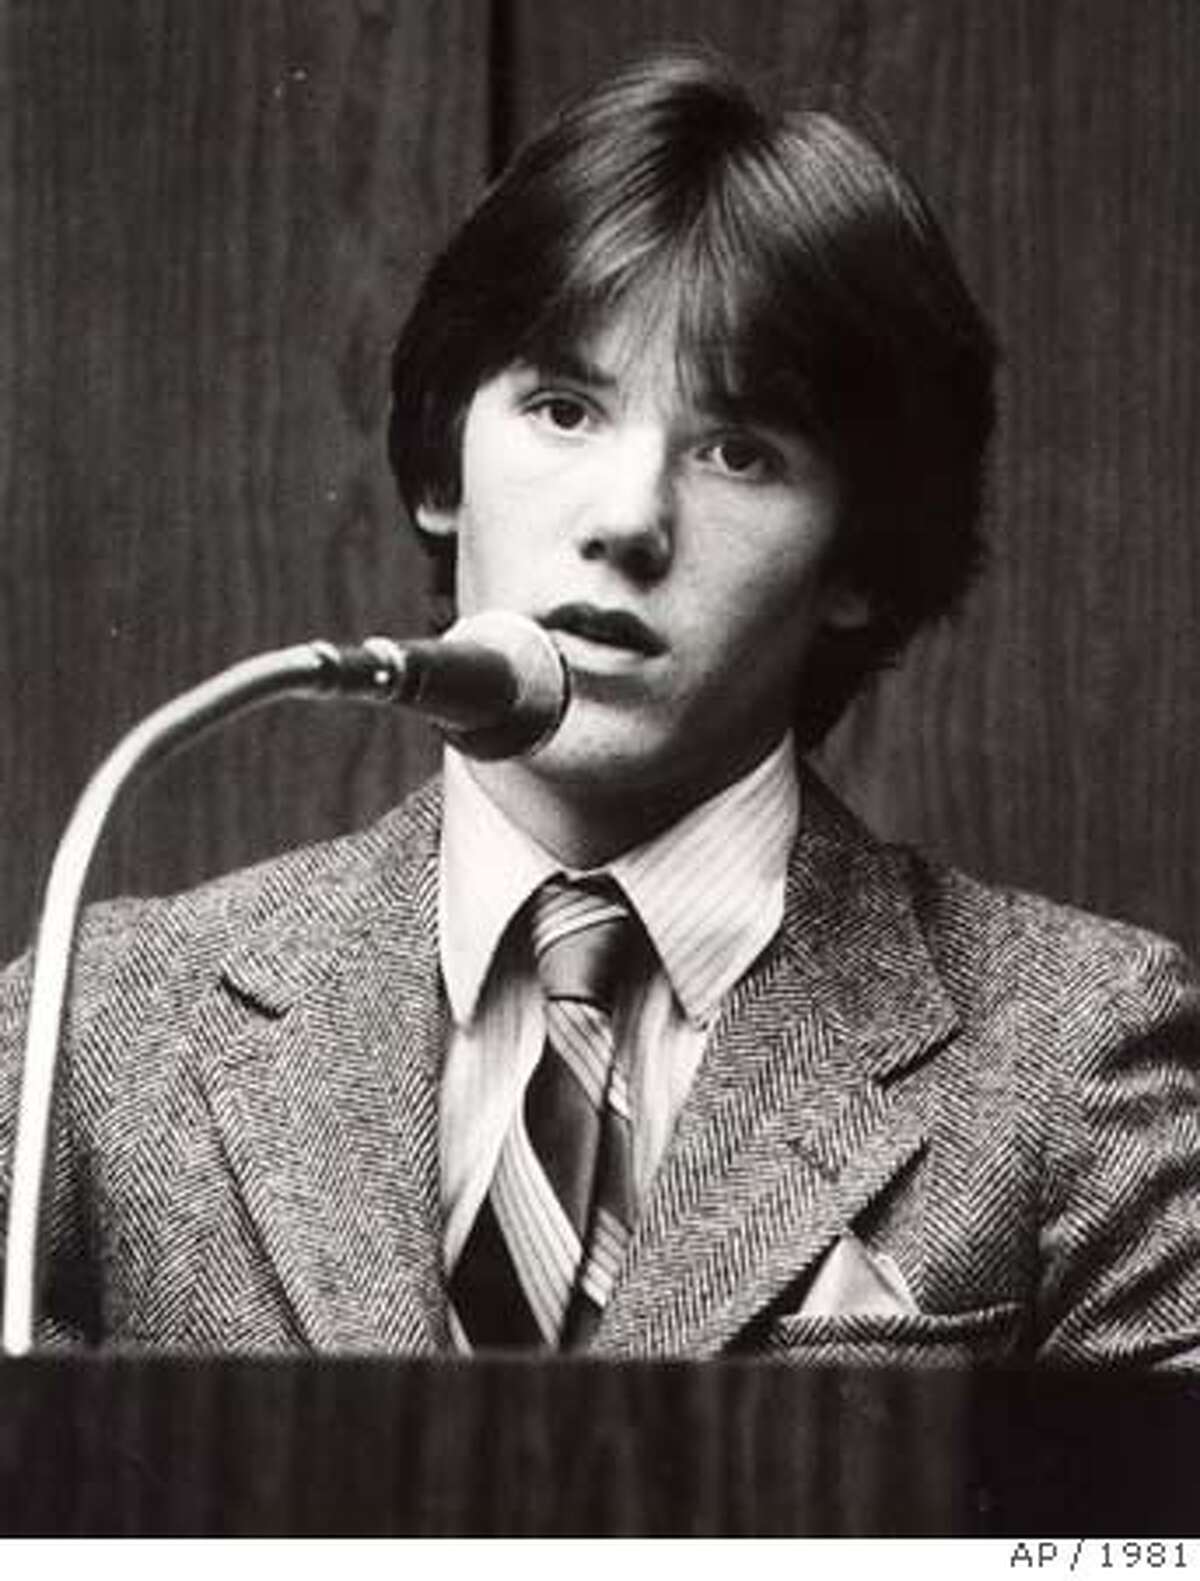 Steven Stayner testifies in 1981 about his abduction in 1972 by Kenneth Parnell and his seven years in captivity. Stayner died in a motorcycle accident in 1989.